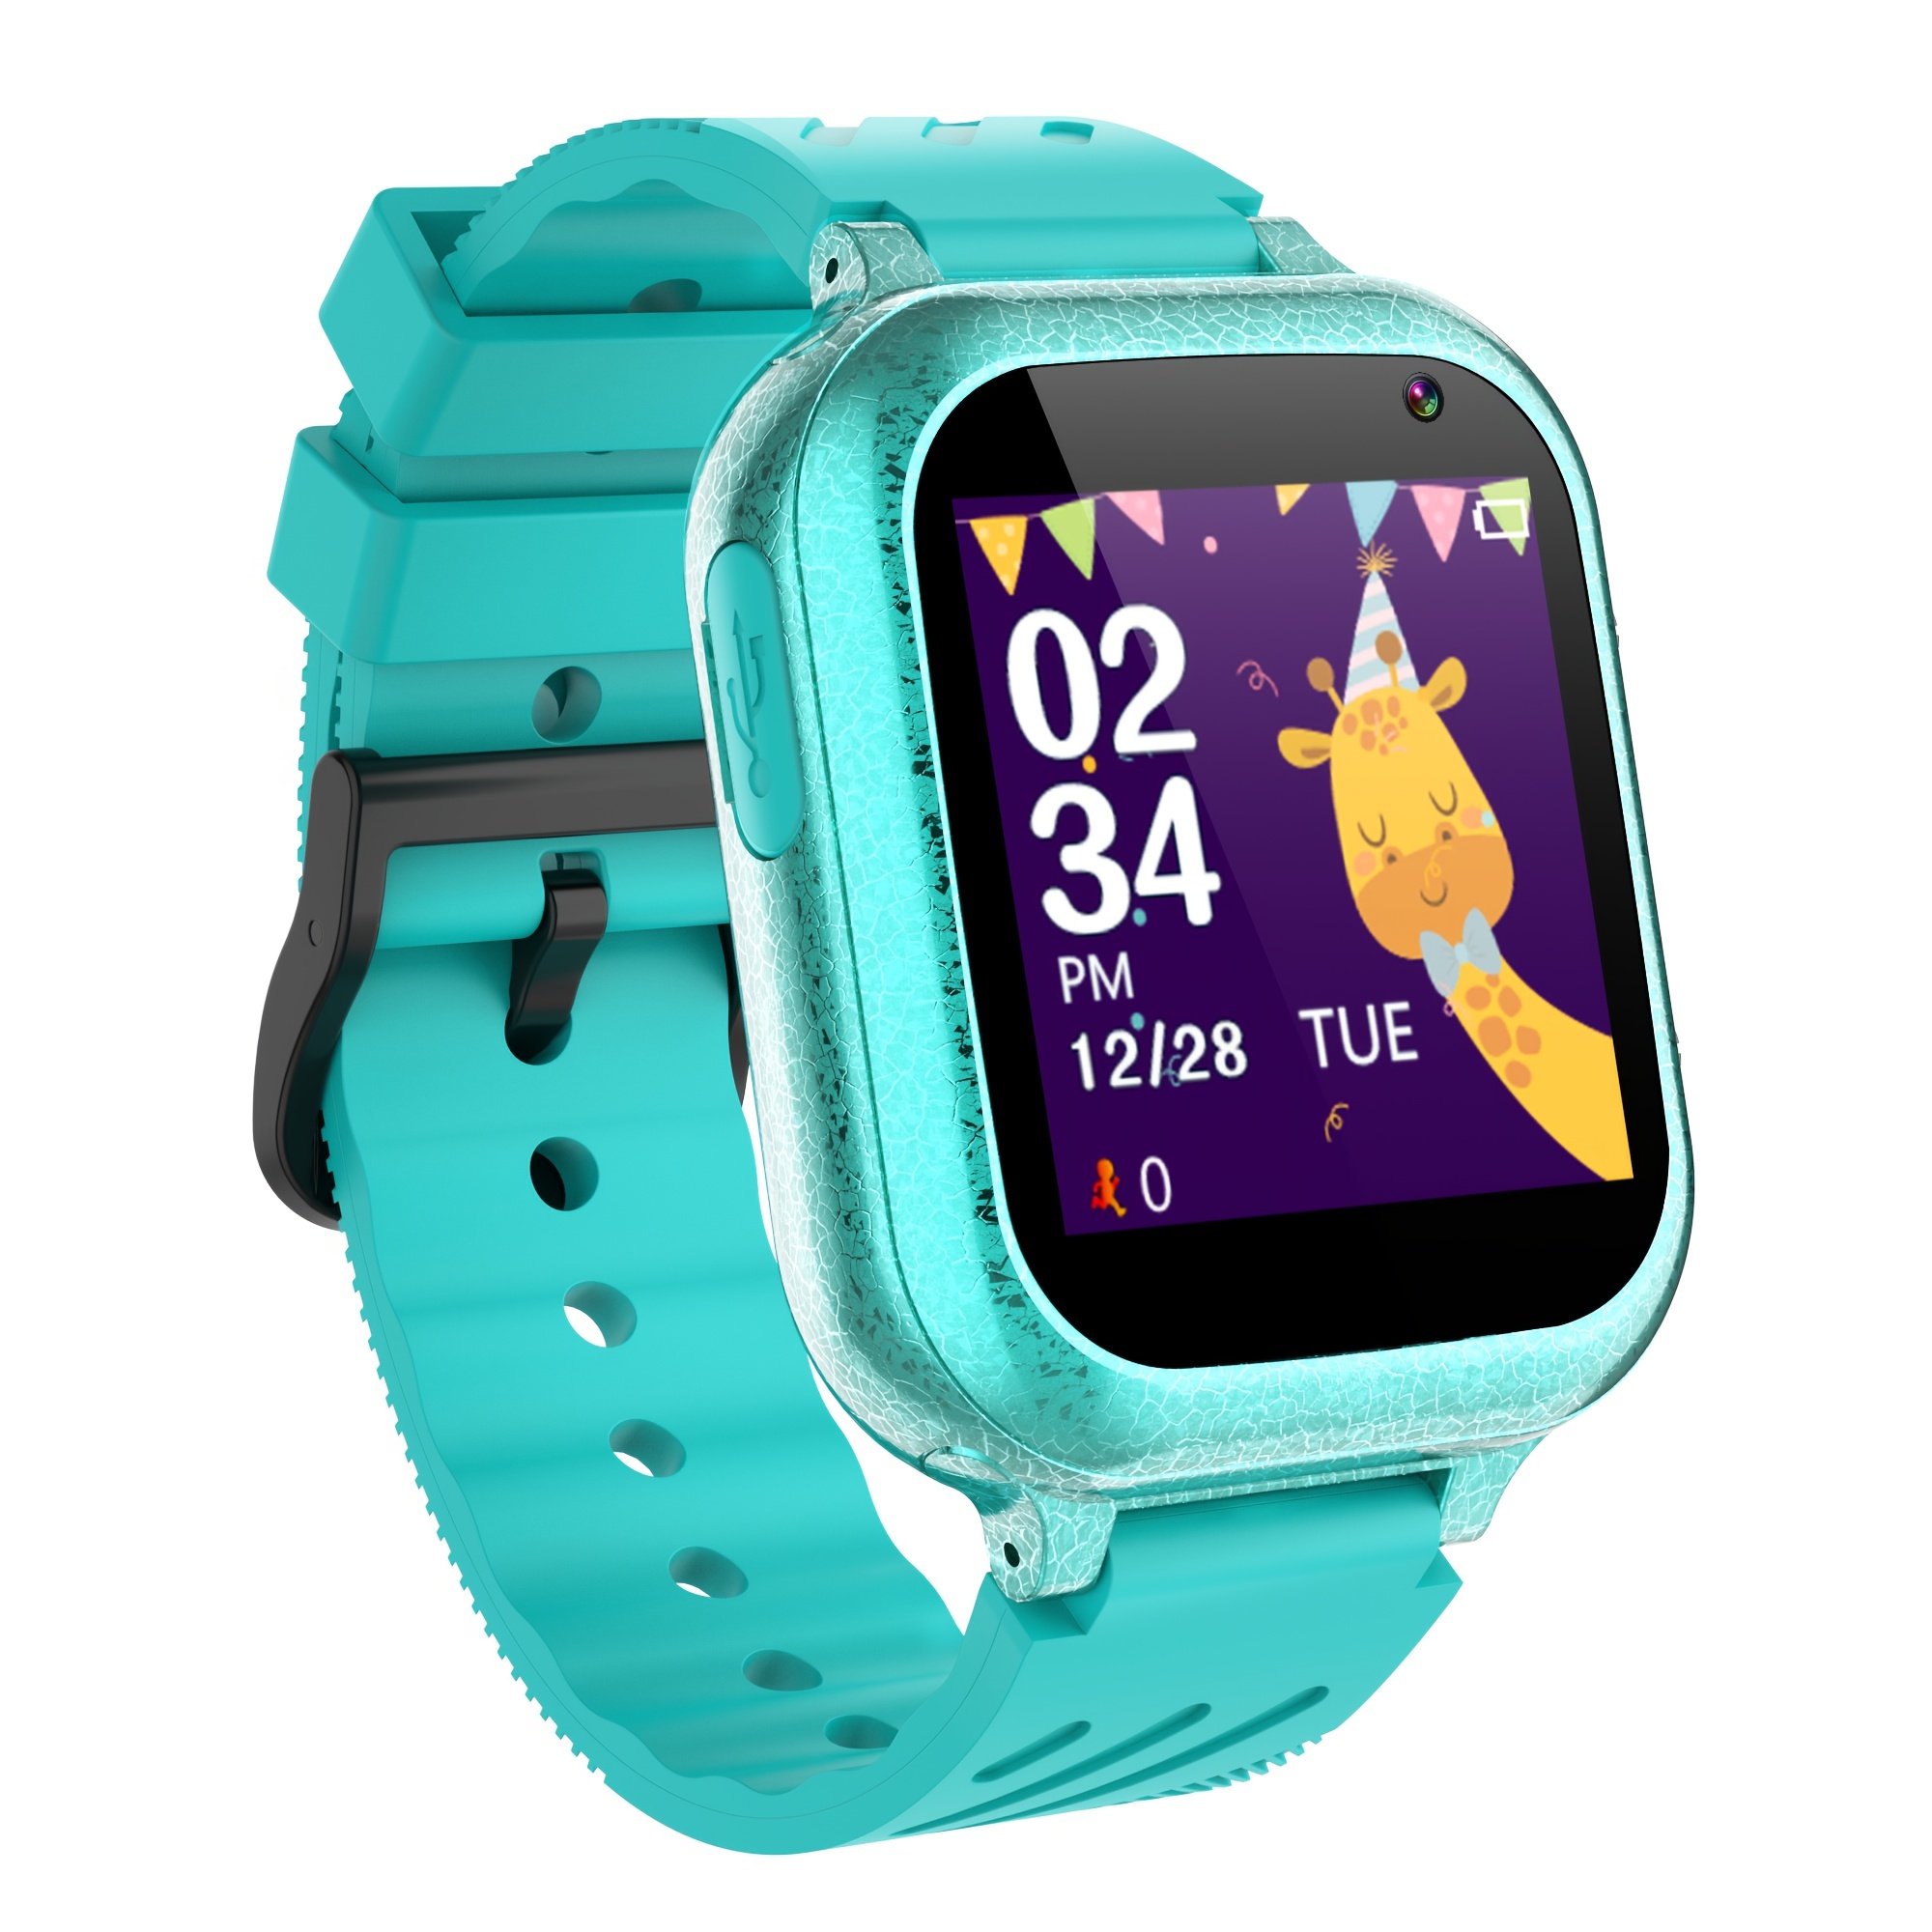 Buy Kids Smart Watches Girls with 26 Games, High-Resolution